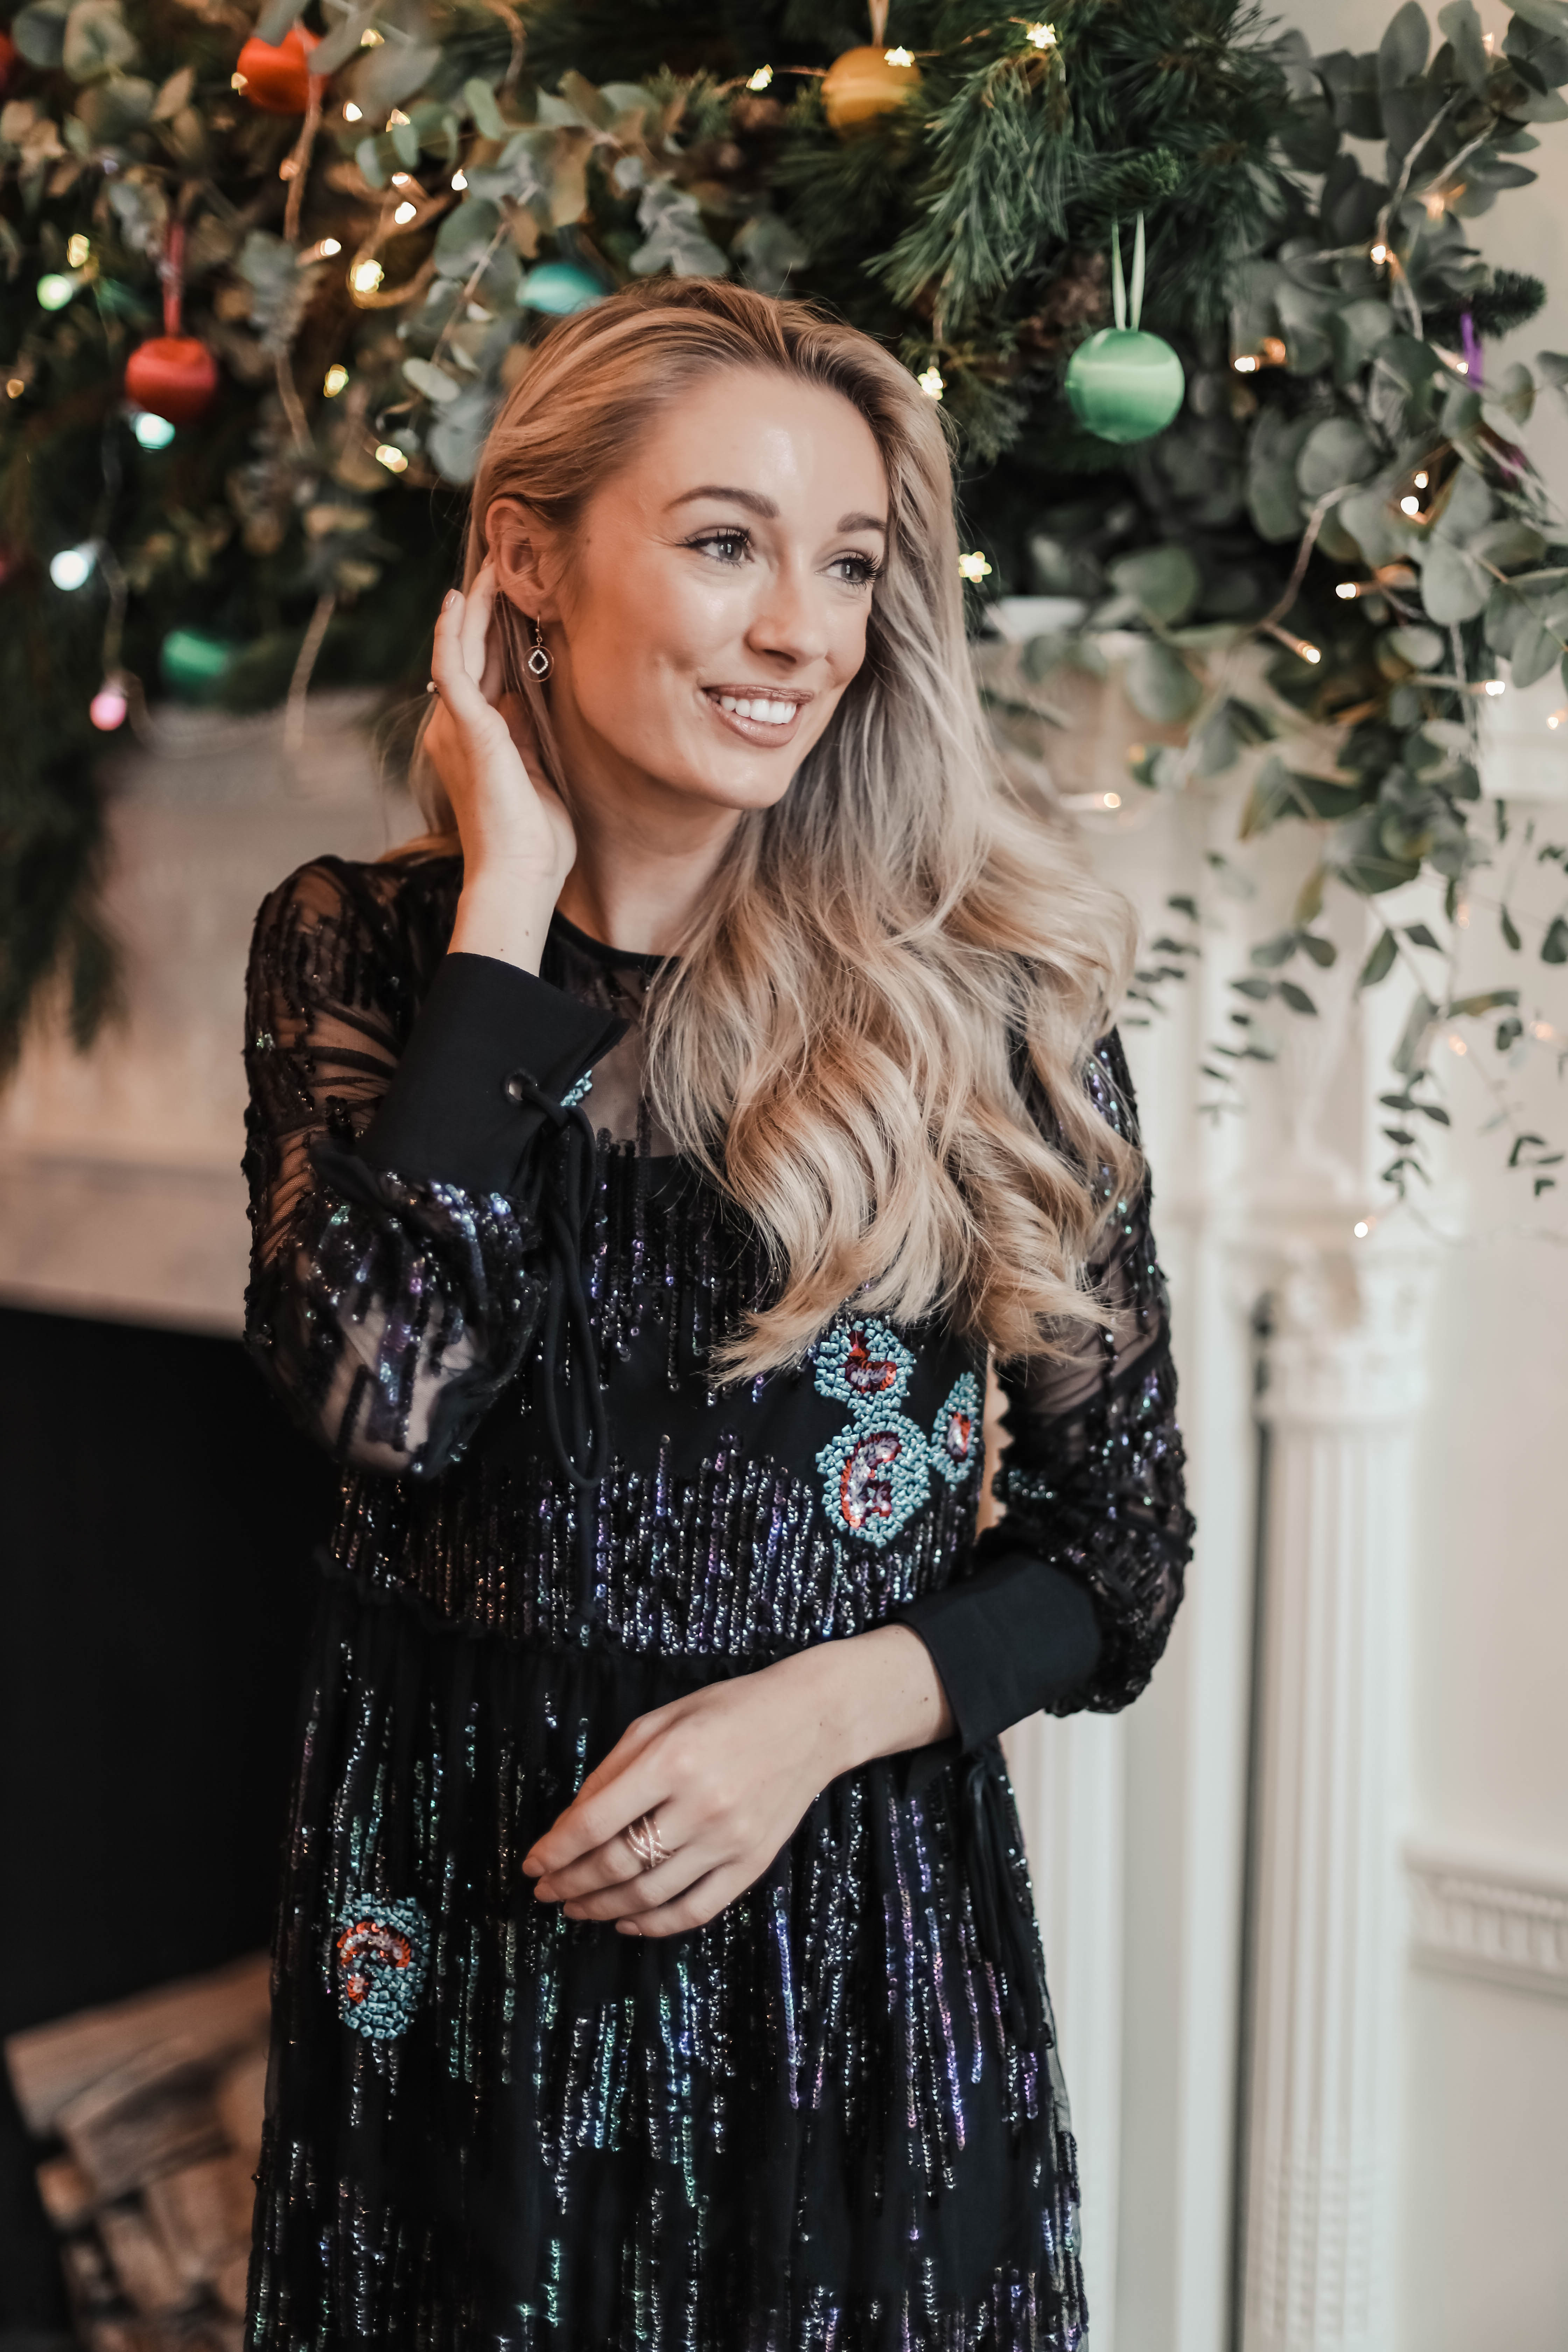 How To Choose The Perfect Christmas Party Dress Fashion Mumblr